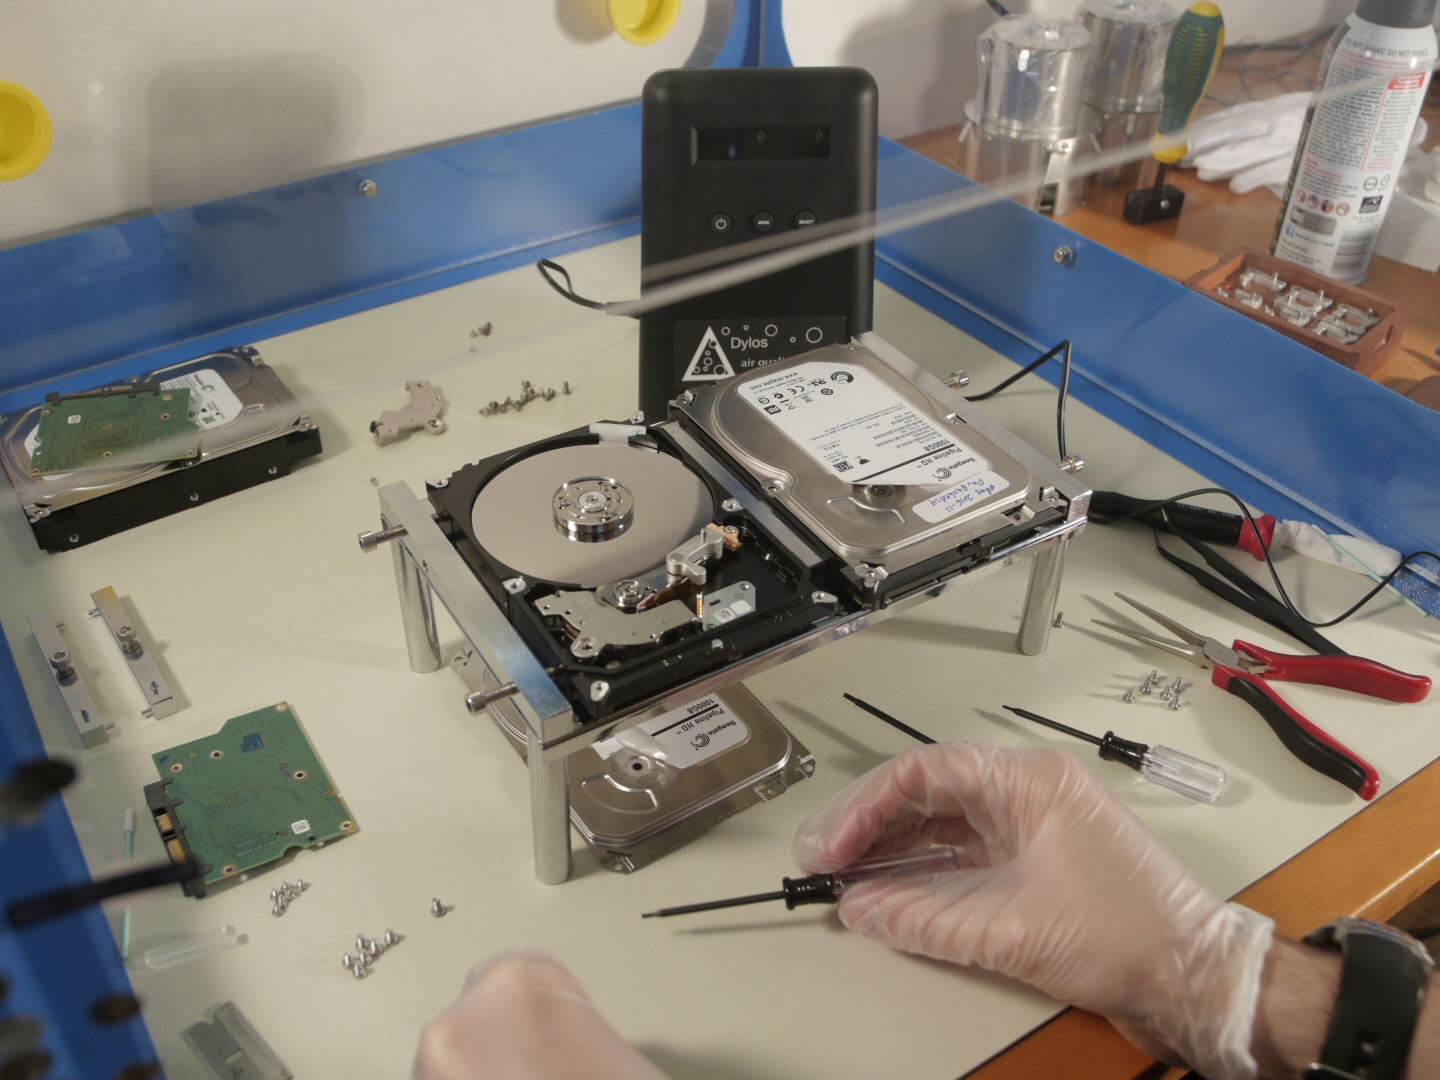 using wise disk cleaner with solid state drive